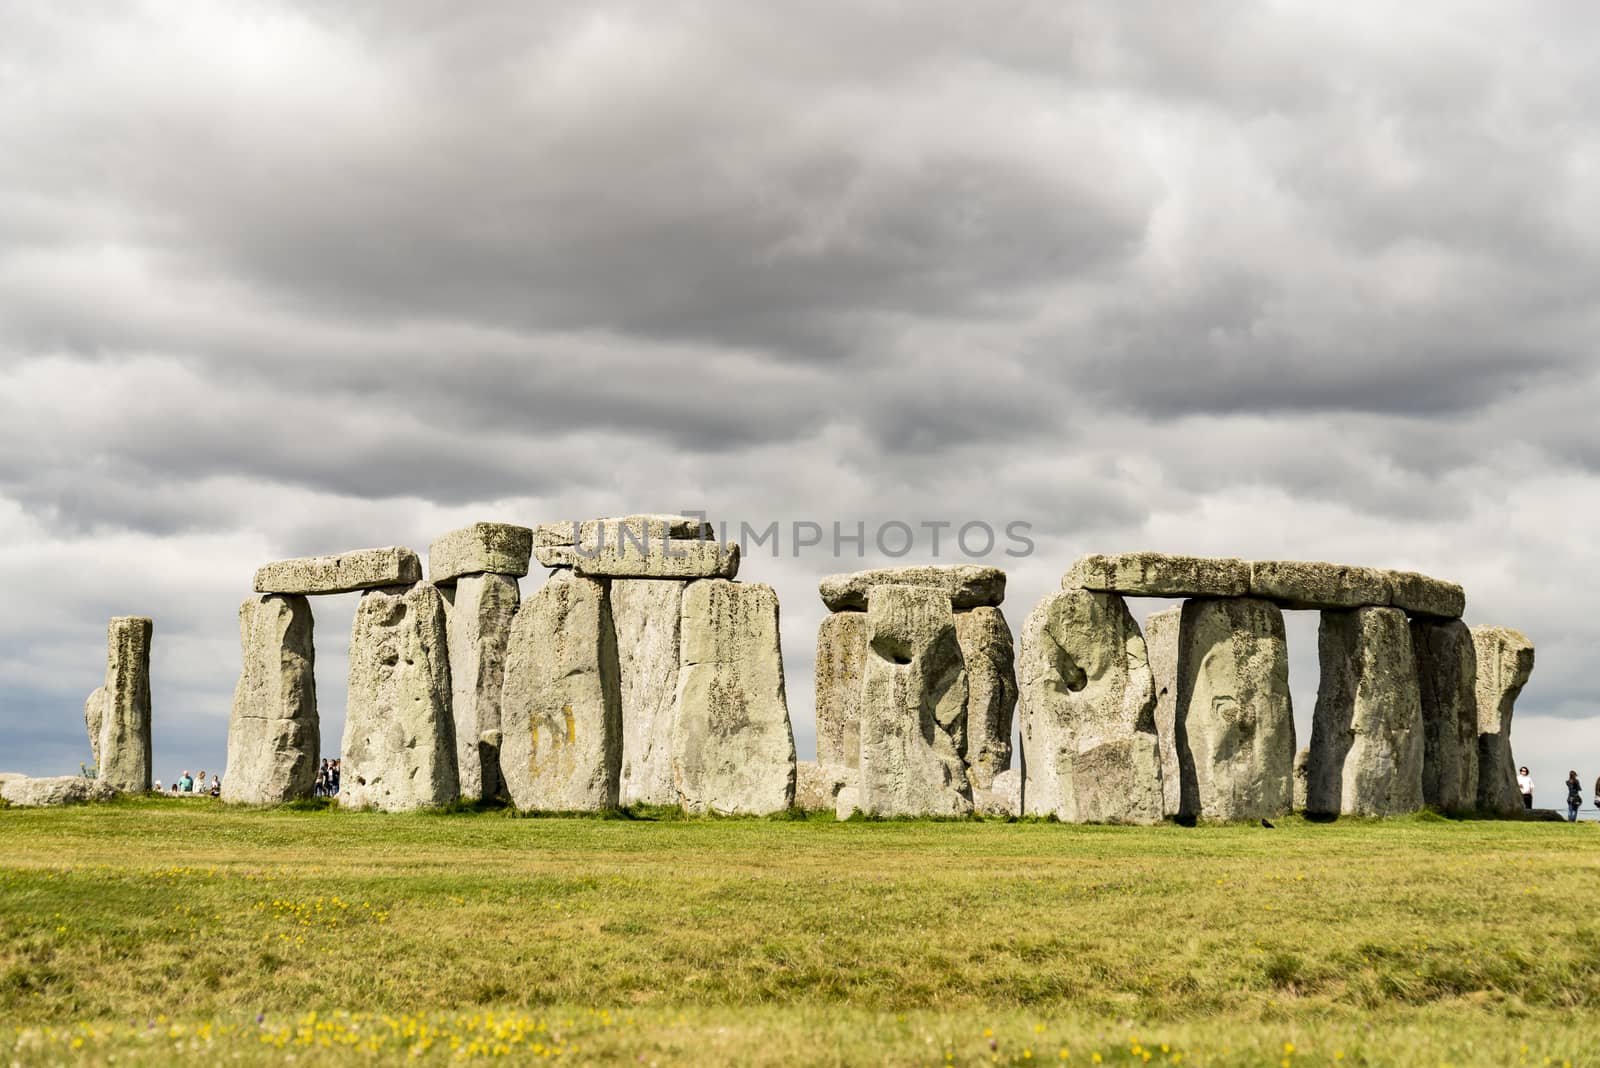 Stonehenge an ancient prehistoric stone monument near Salisbury, Wiltshire, UK. It was built anywhere from 3000 BC to 2000 BC. Stonehenge is a UNESCO World Heritage Site in England.